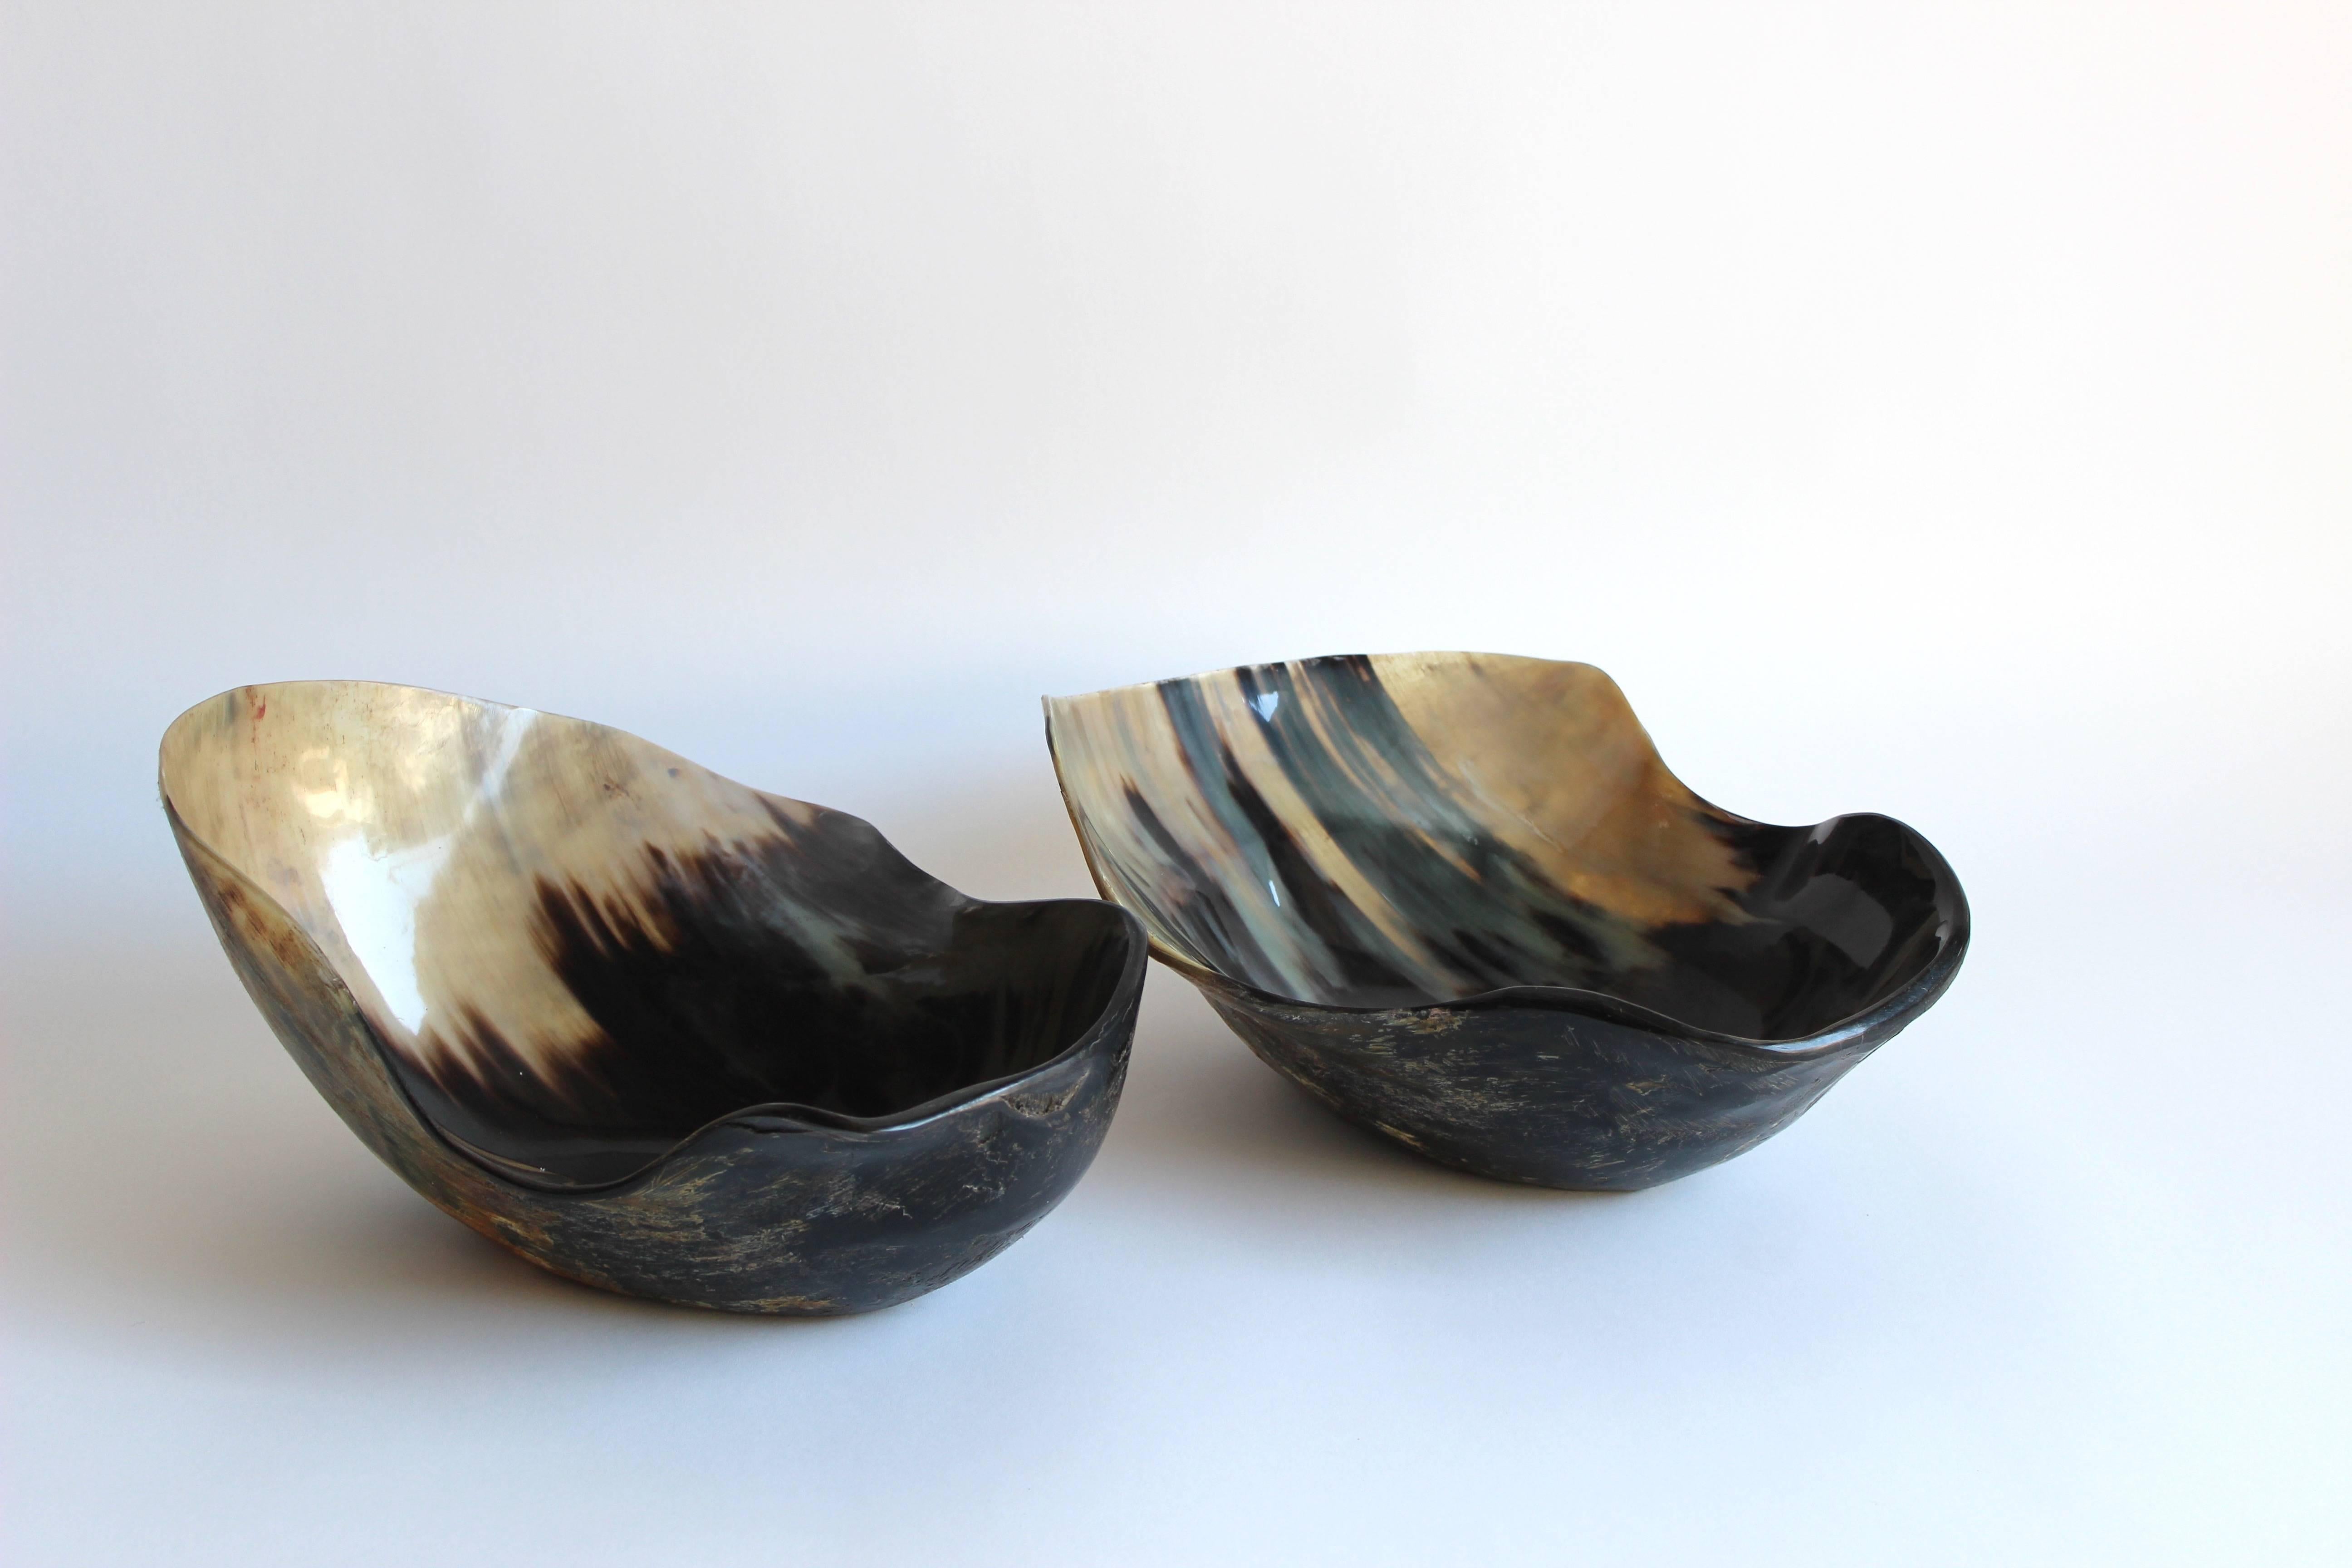 Set of two free-form serving horn bowls in the style of Carl Auböck.

Measure: 5.75